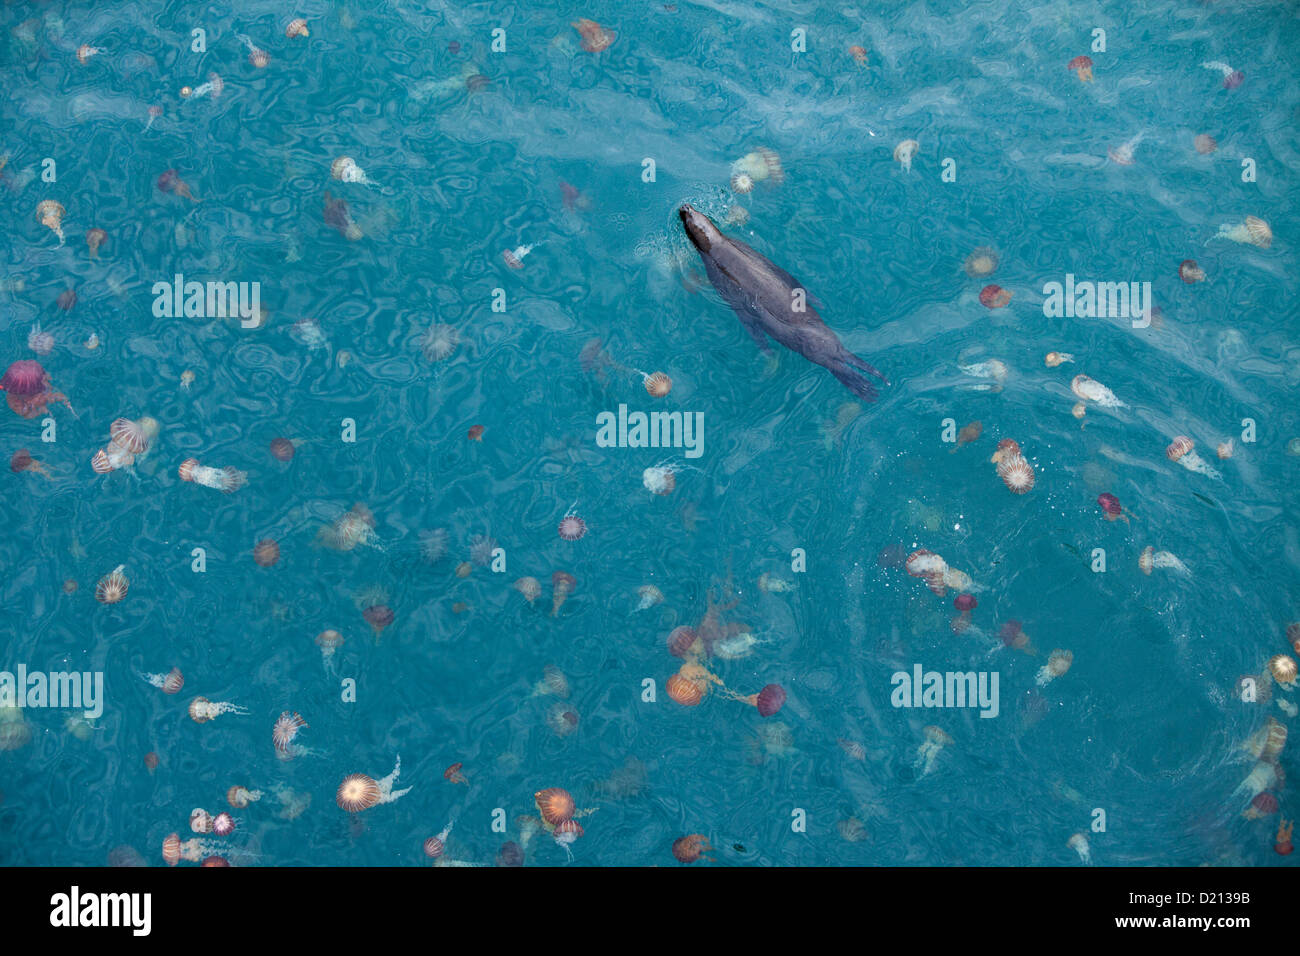 A sea lion swims through a sea of giant colorful jellyfish, Iquique, Tarapaca, Chile, South America Stock Photo